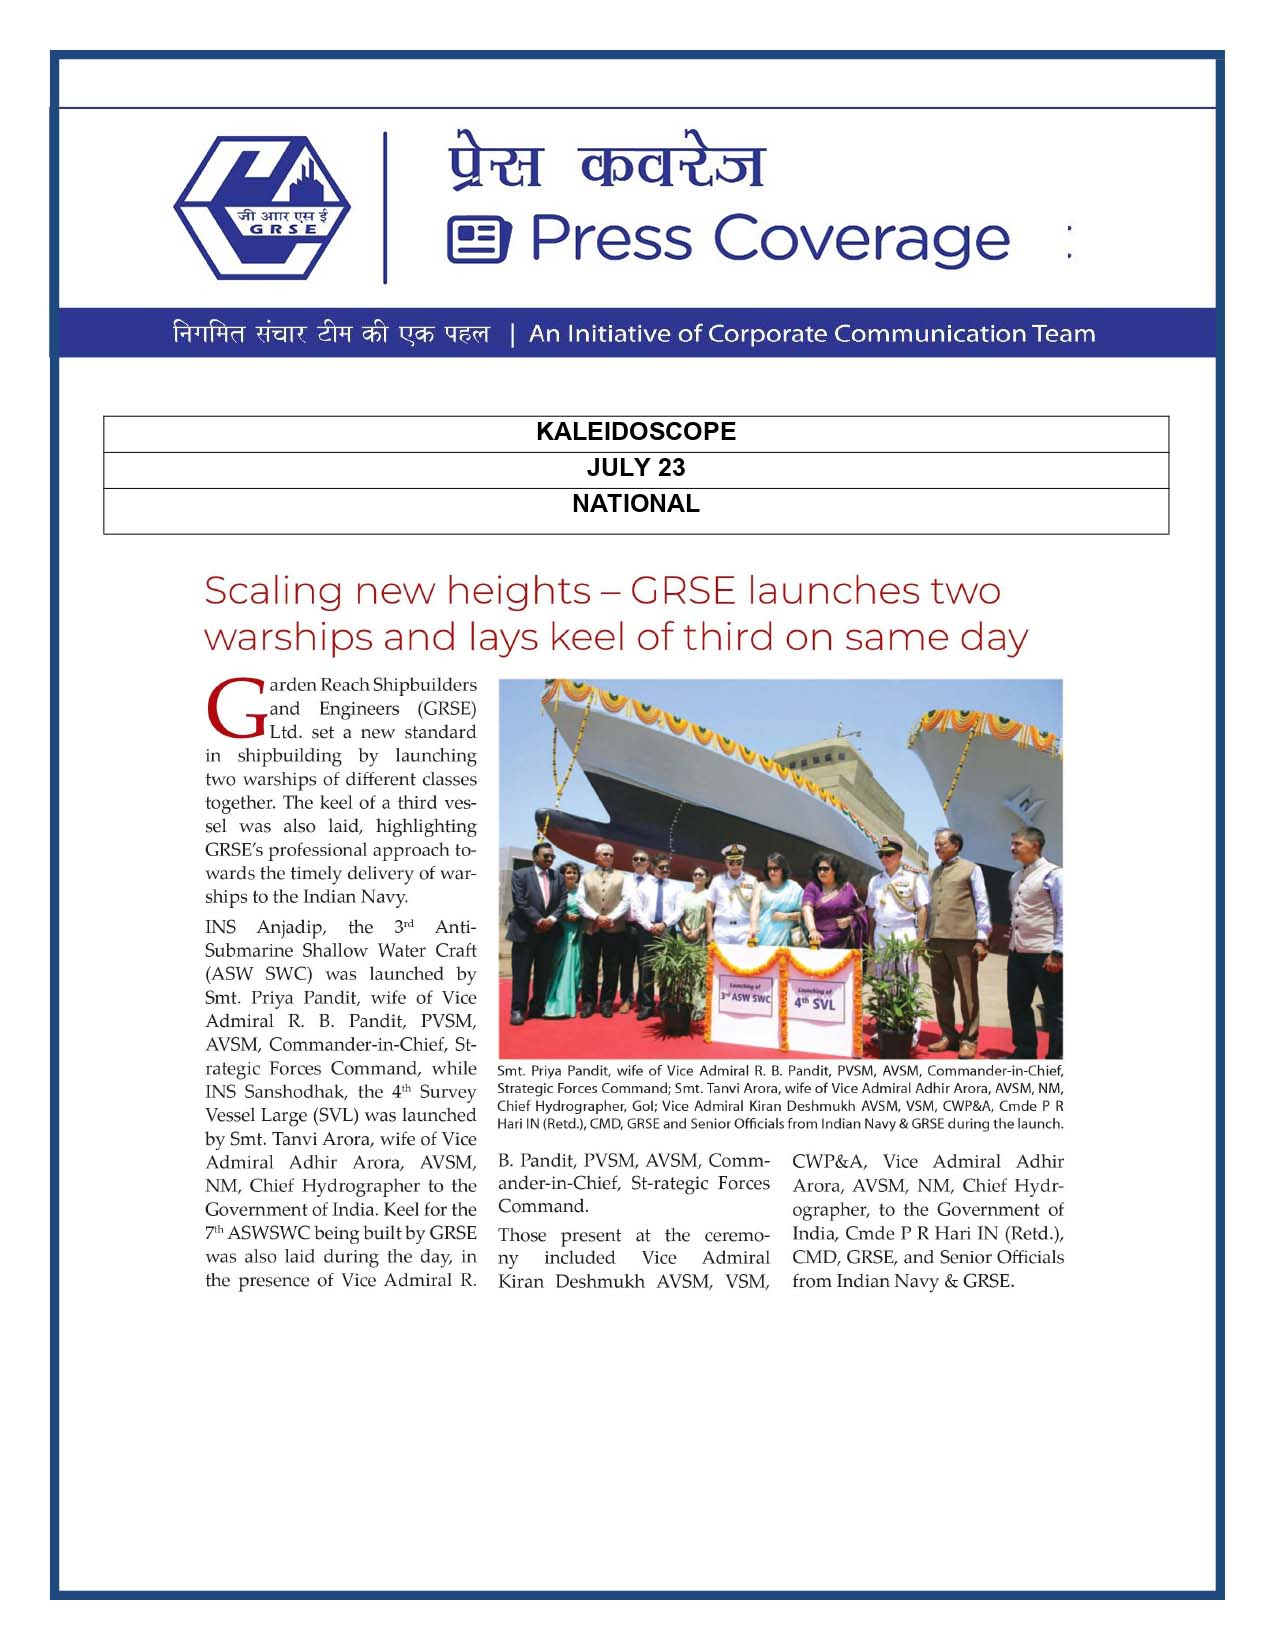 Press Coverage : Kaleidoscope, July 23 : Scaling New Heights - GRSE Launches Two Warships and Lays Keel of Third on same day